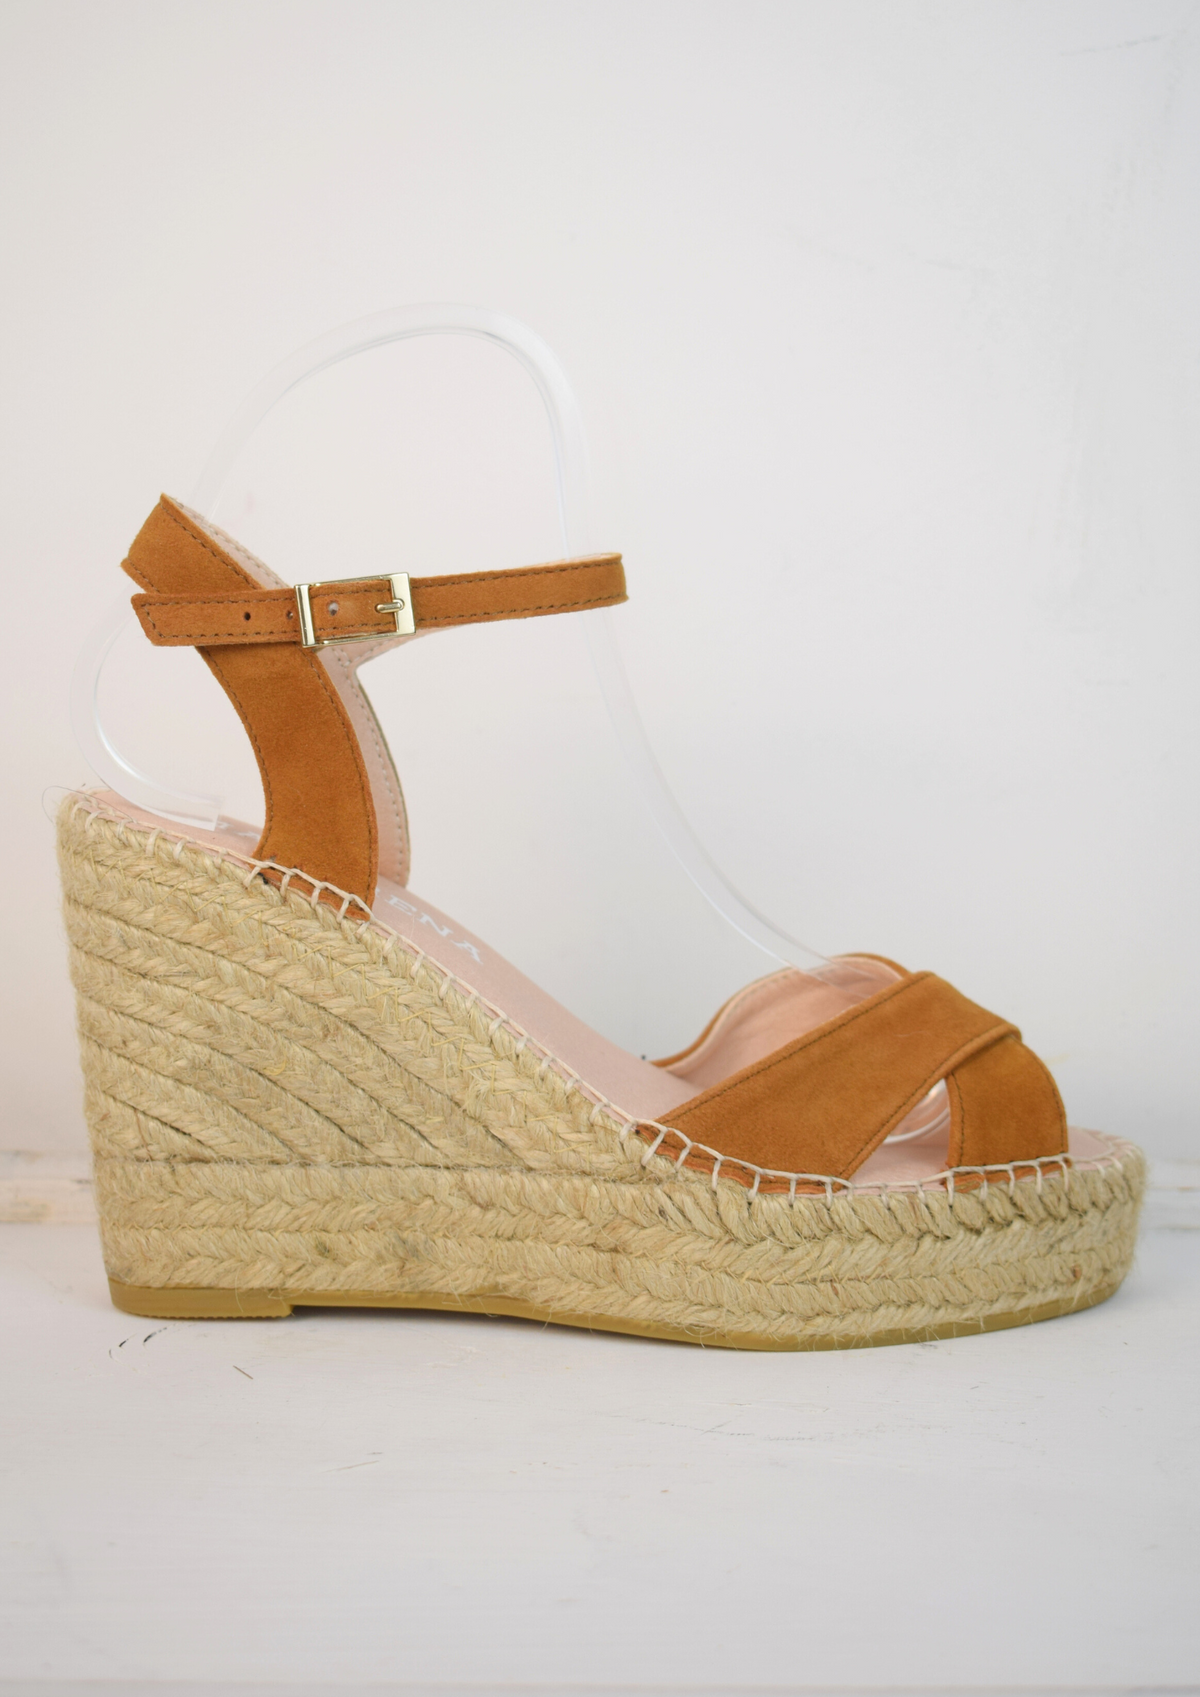 Wedge sandals with a tan cross cover on the toes